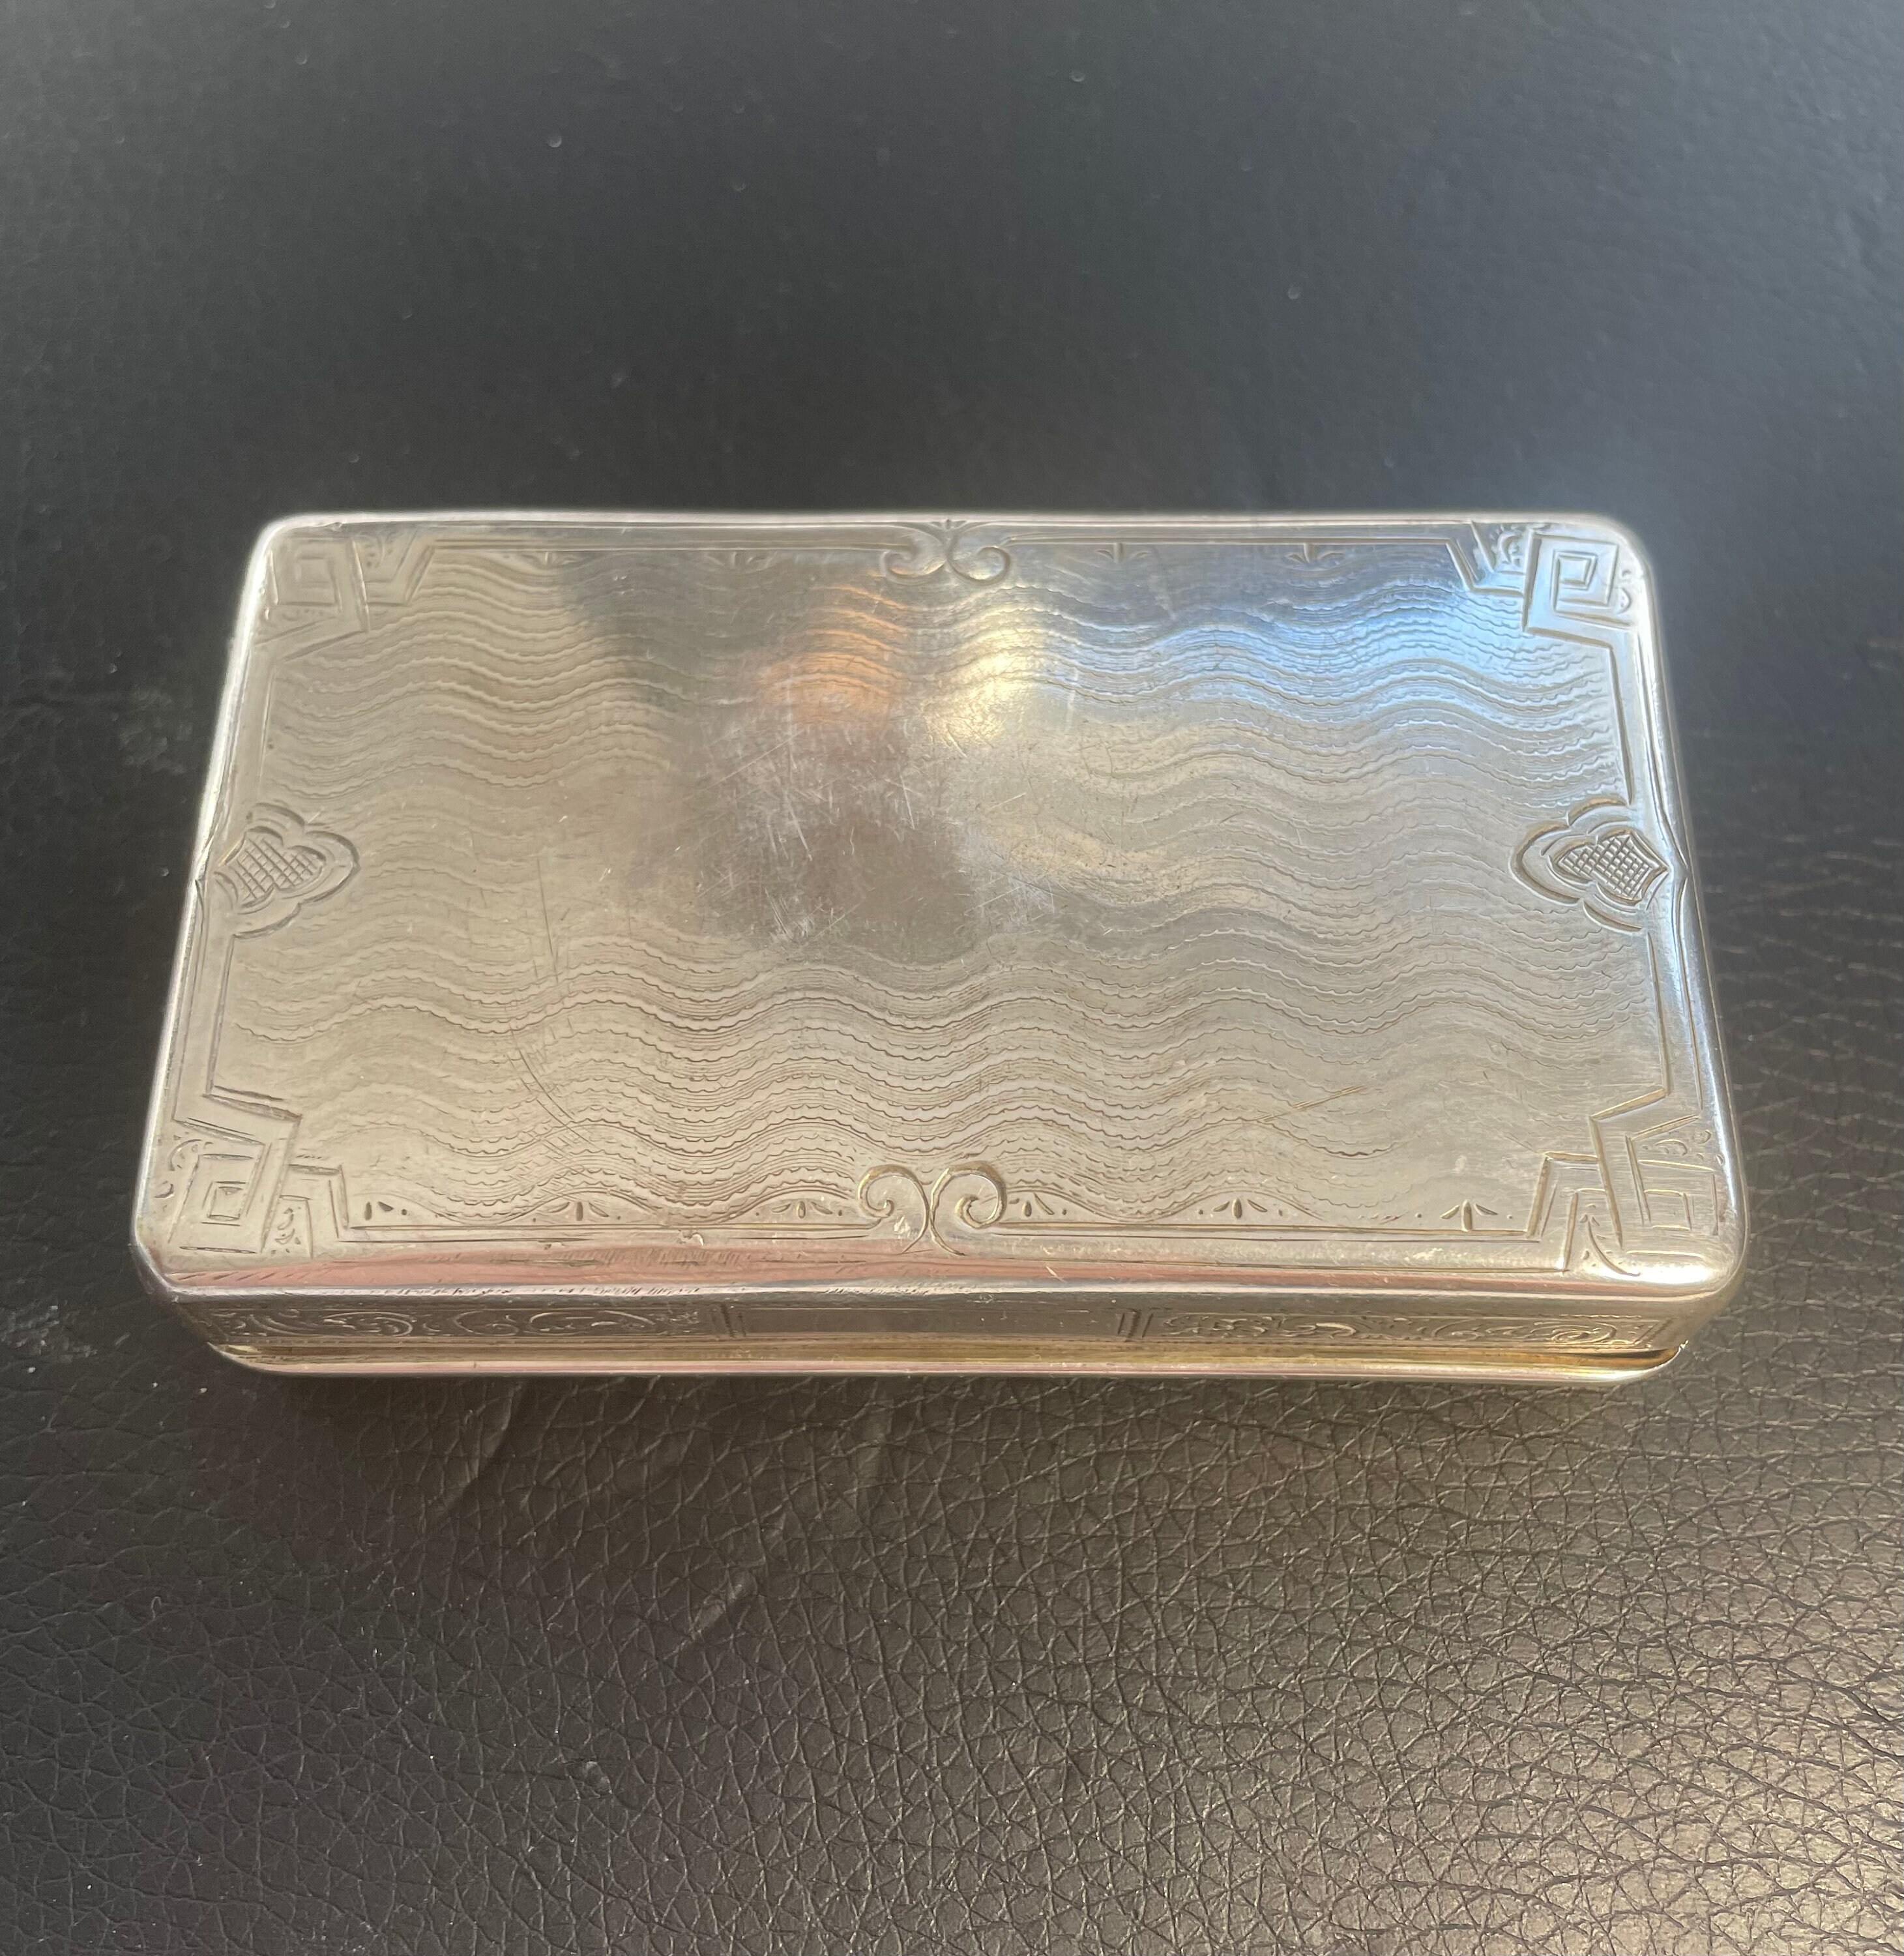 Antique French 19th Century .800 Not Sterling Silver Snuff Box by Guichard